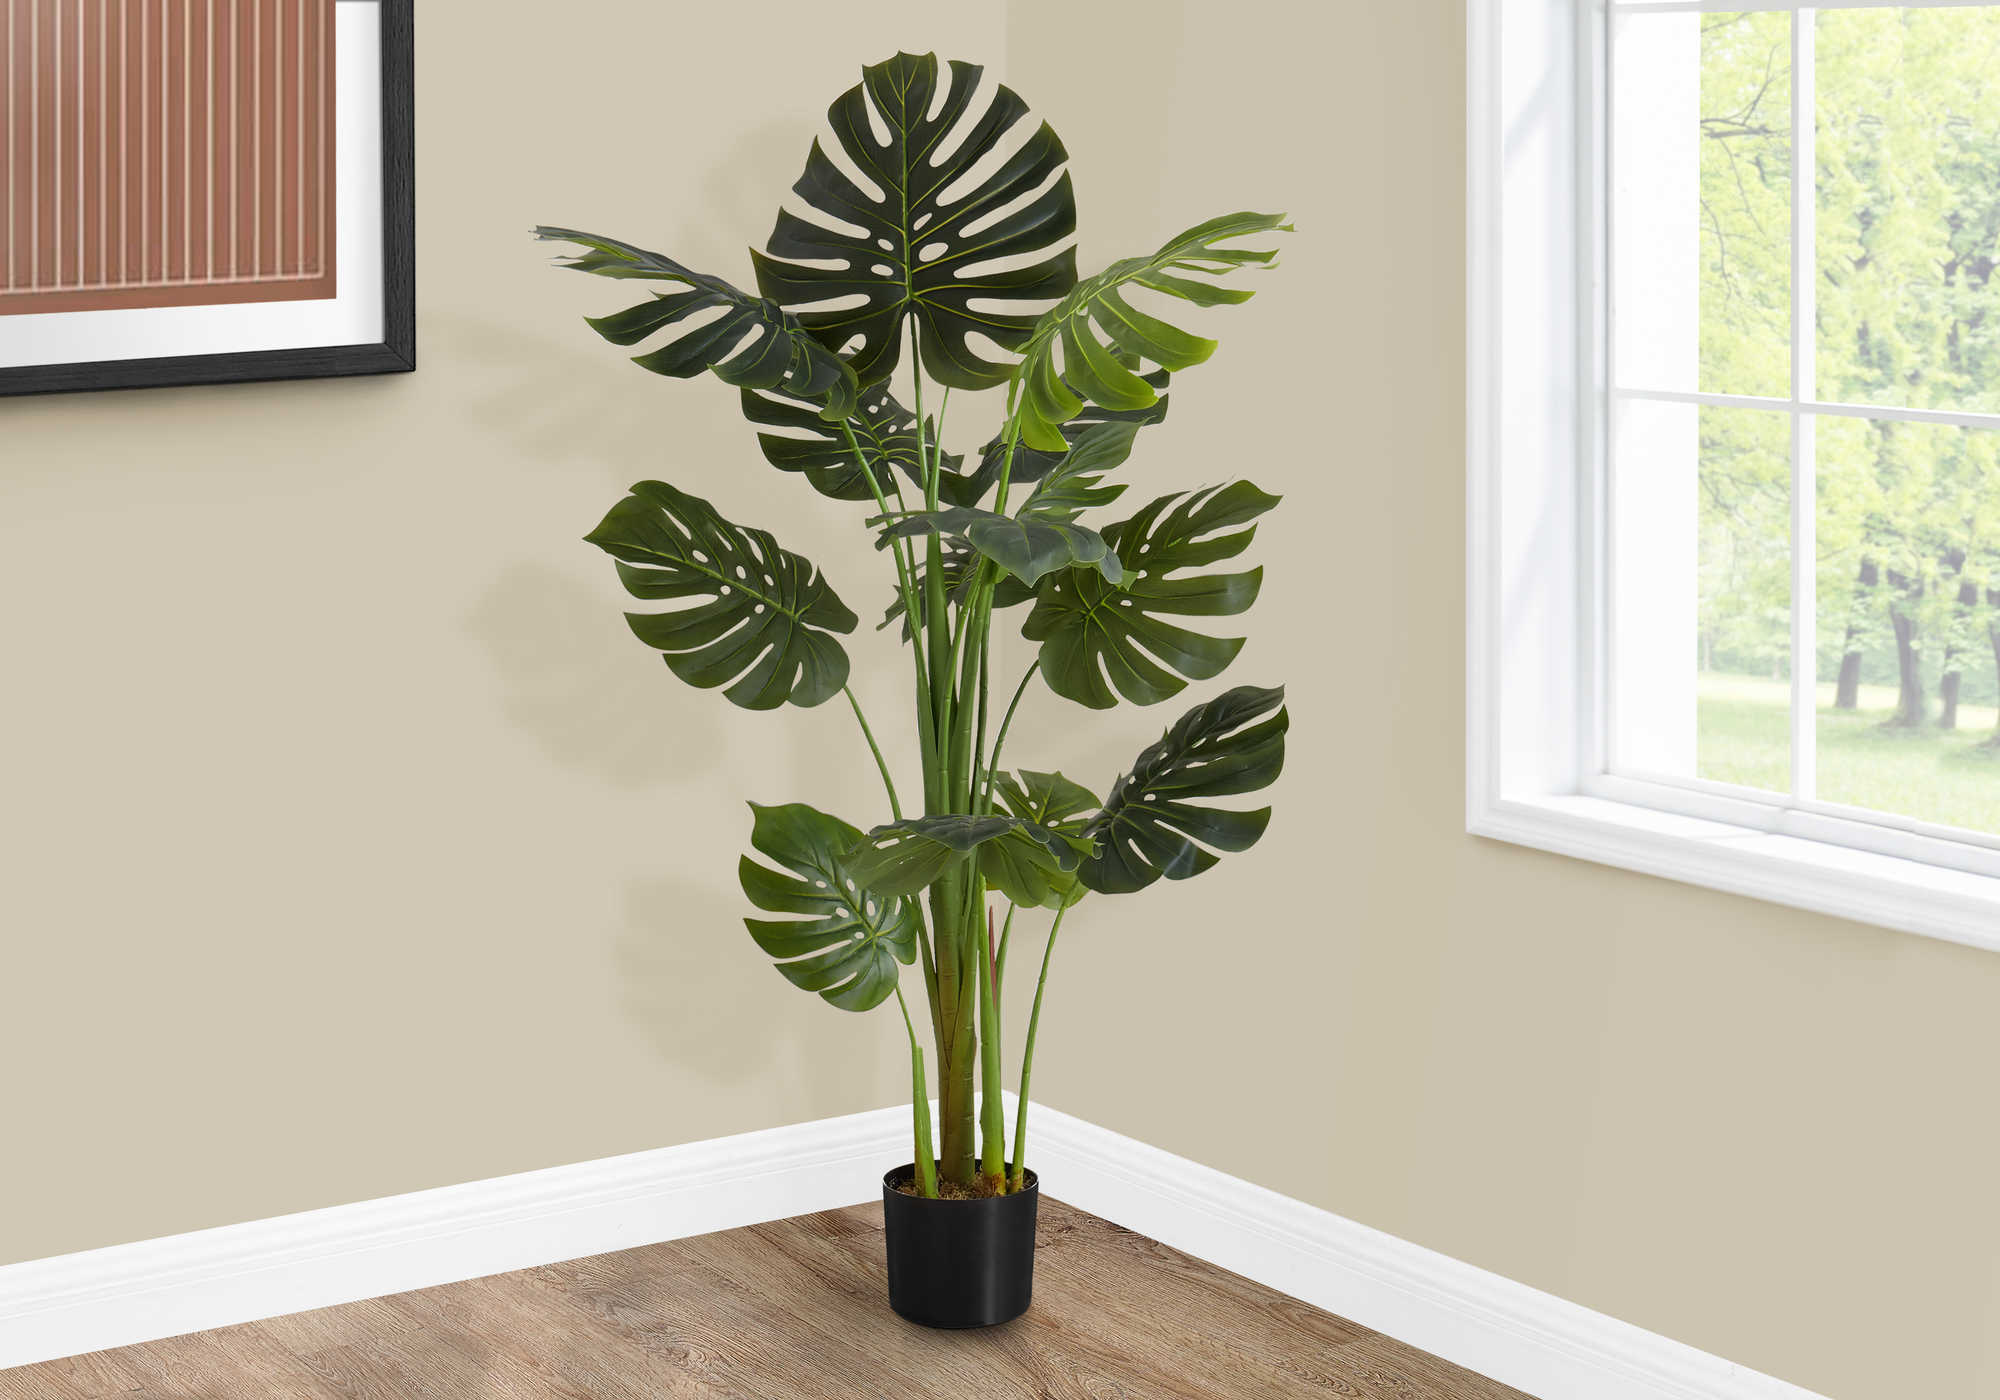 ARTIFICIAL PLANT - 55"H / INDOOR MONSTERA IN A 6" POT